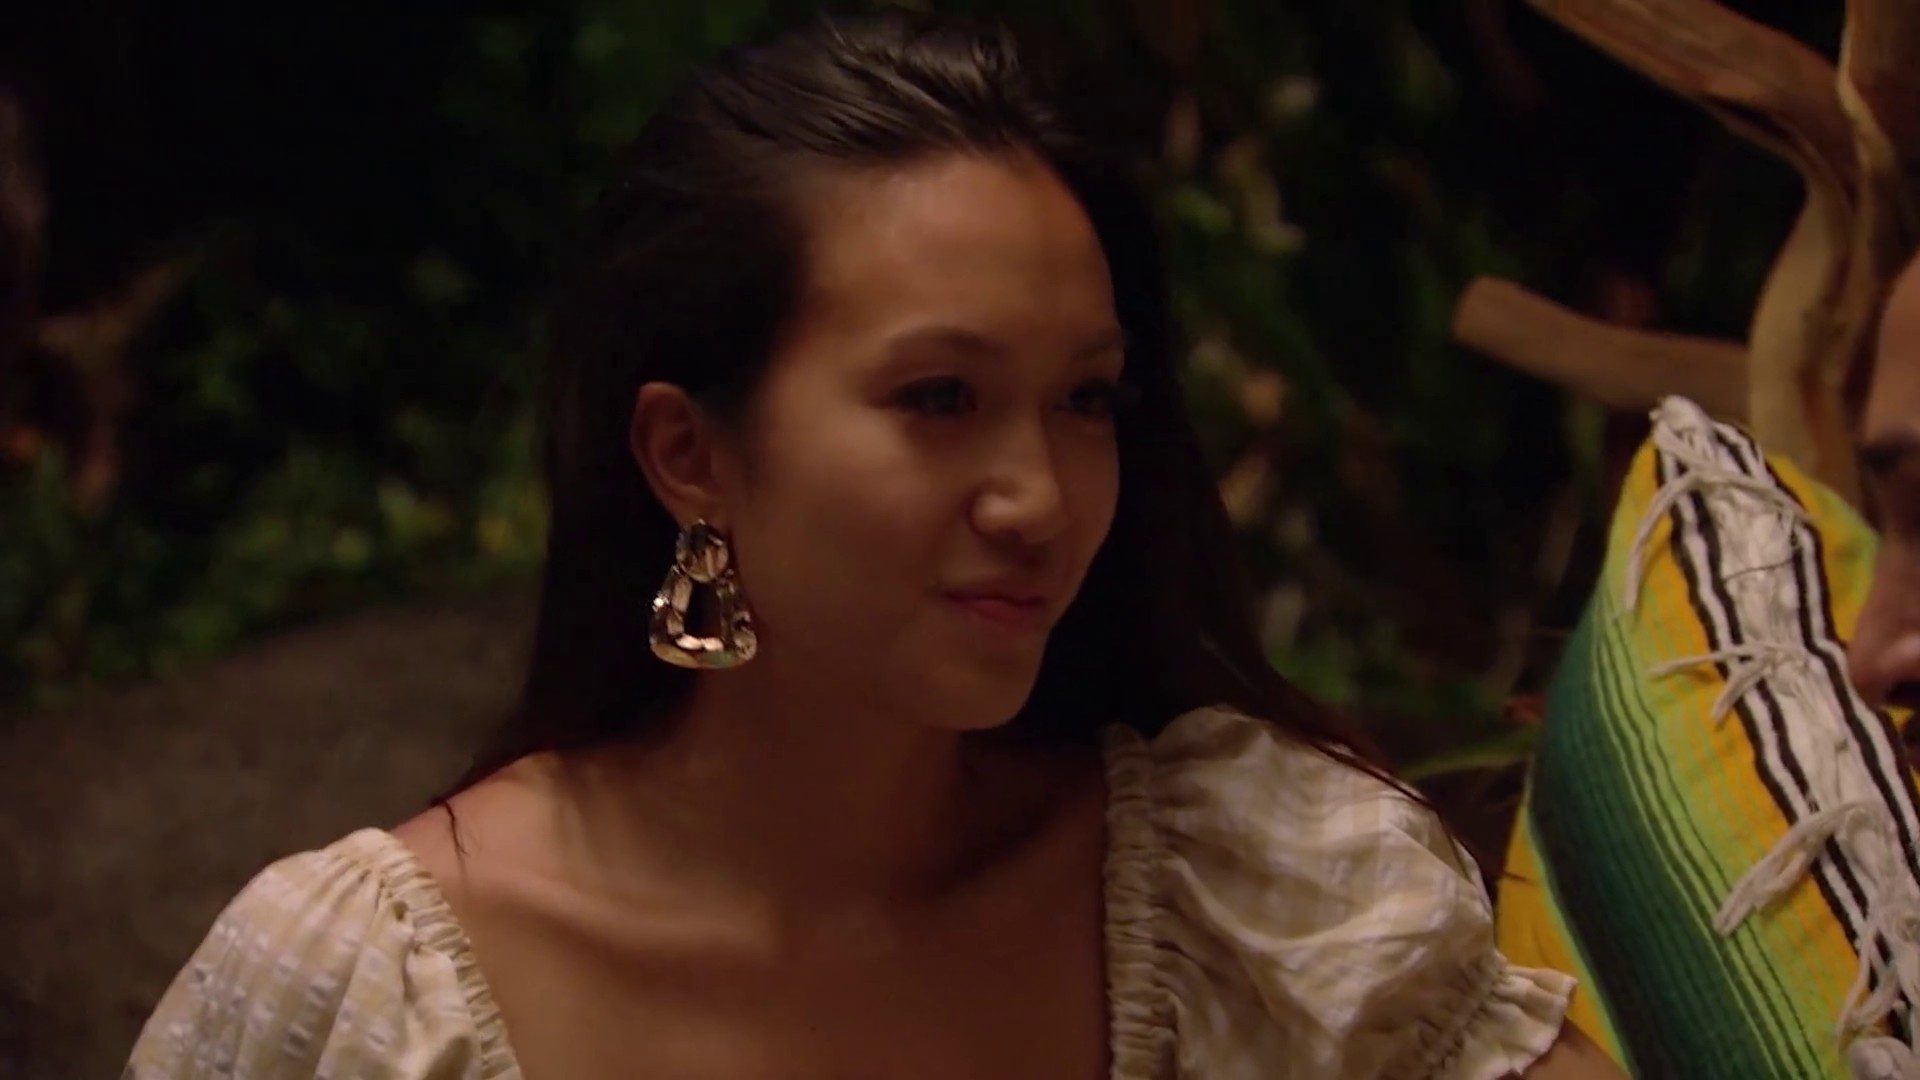 Events From Previous Episode That May AffectBachelor In Paradise Season 7 Episode 6